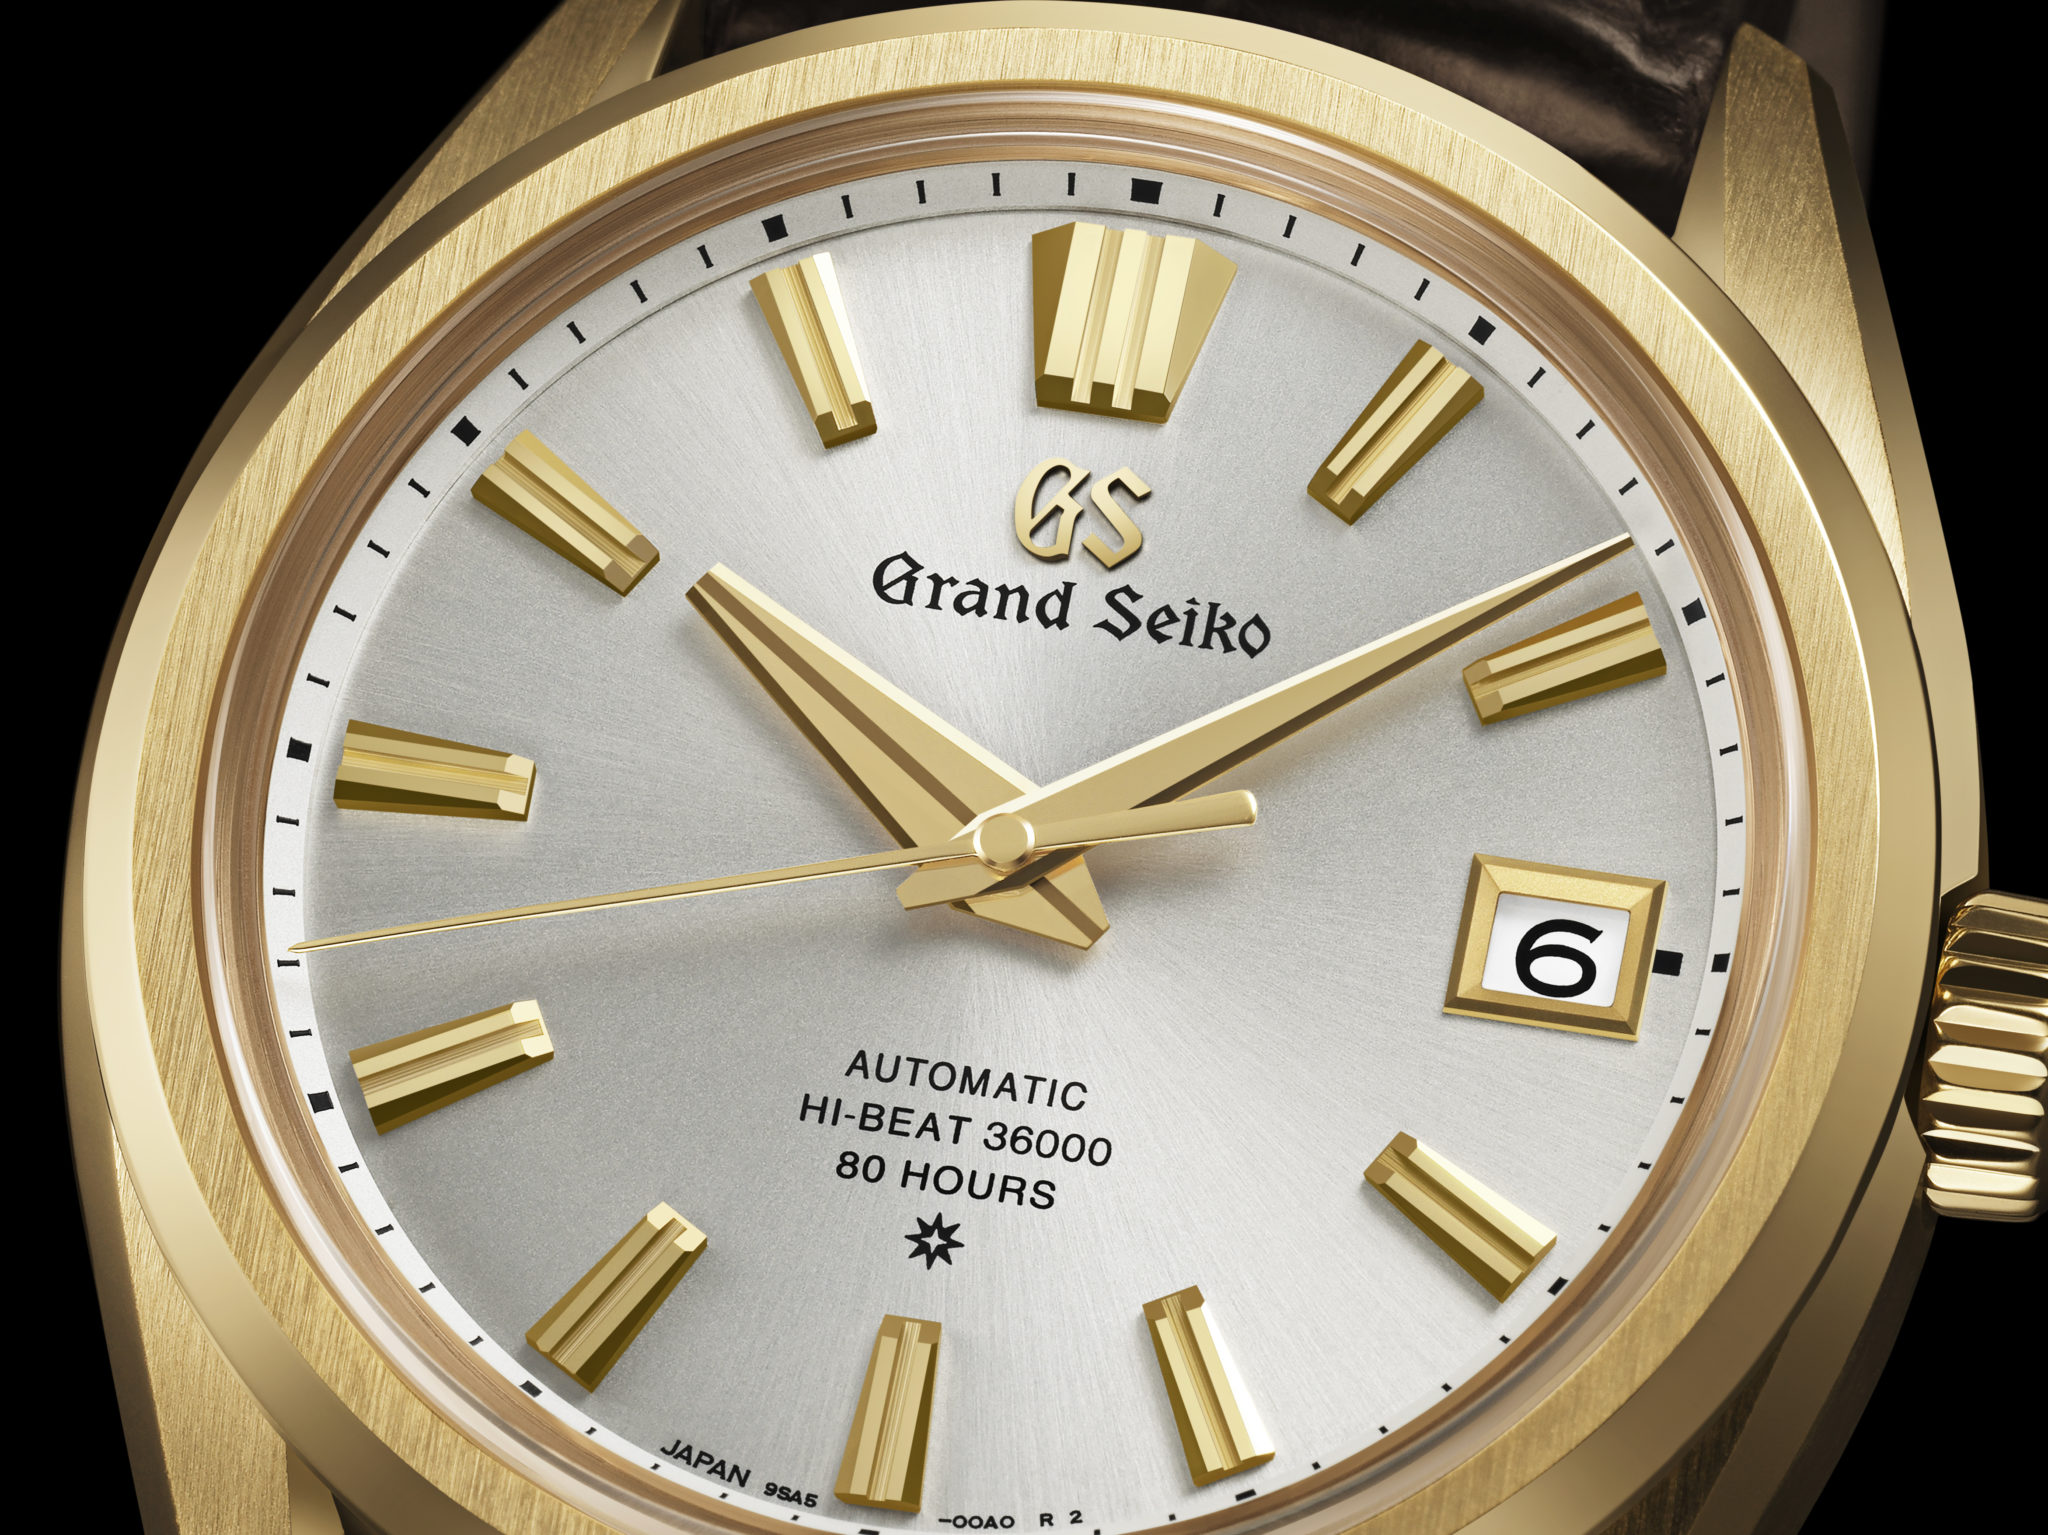 IN DEPTH: Grand Seiko's remarkable USA growth story